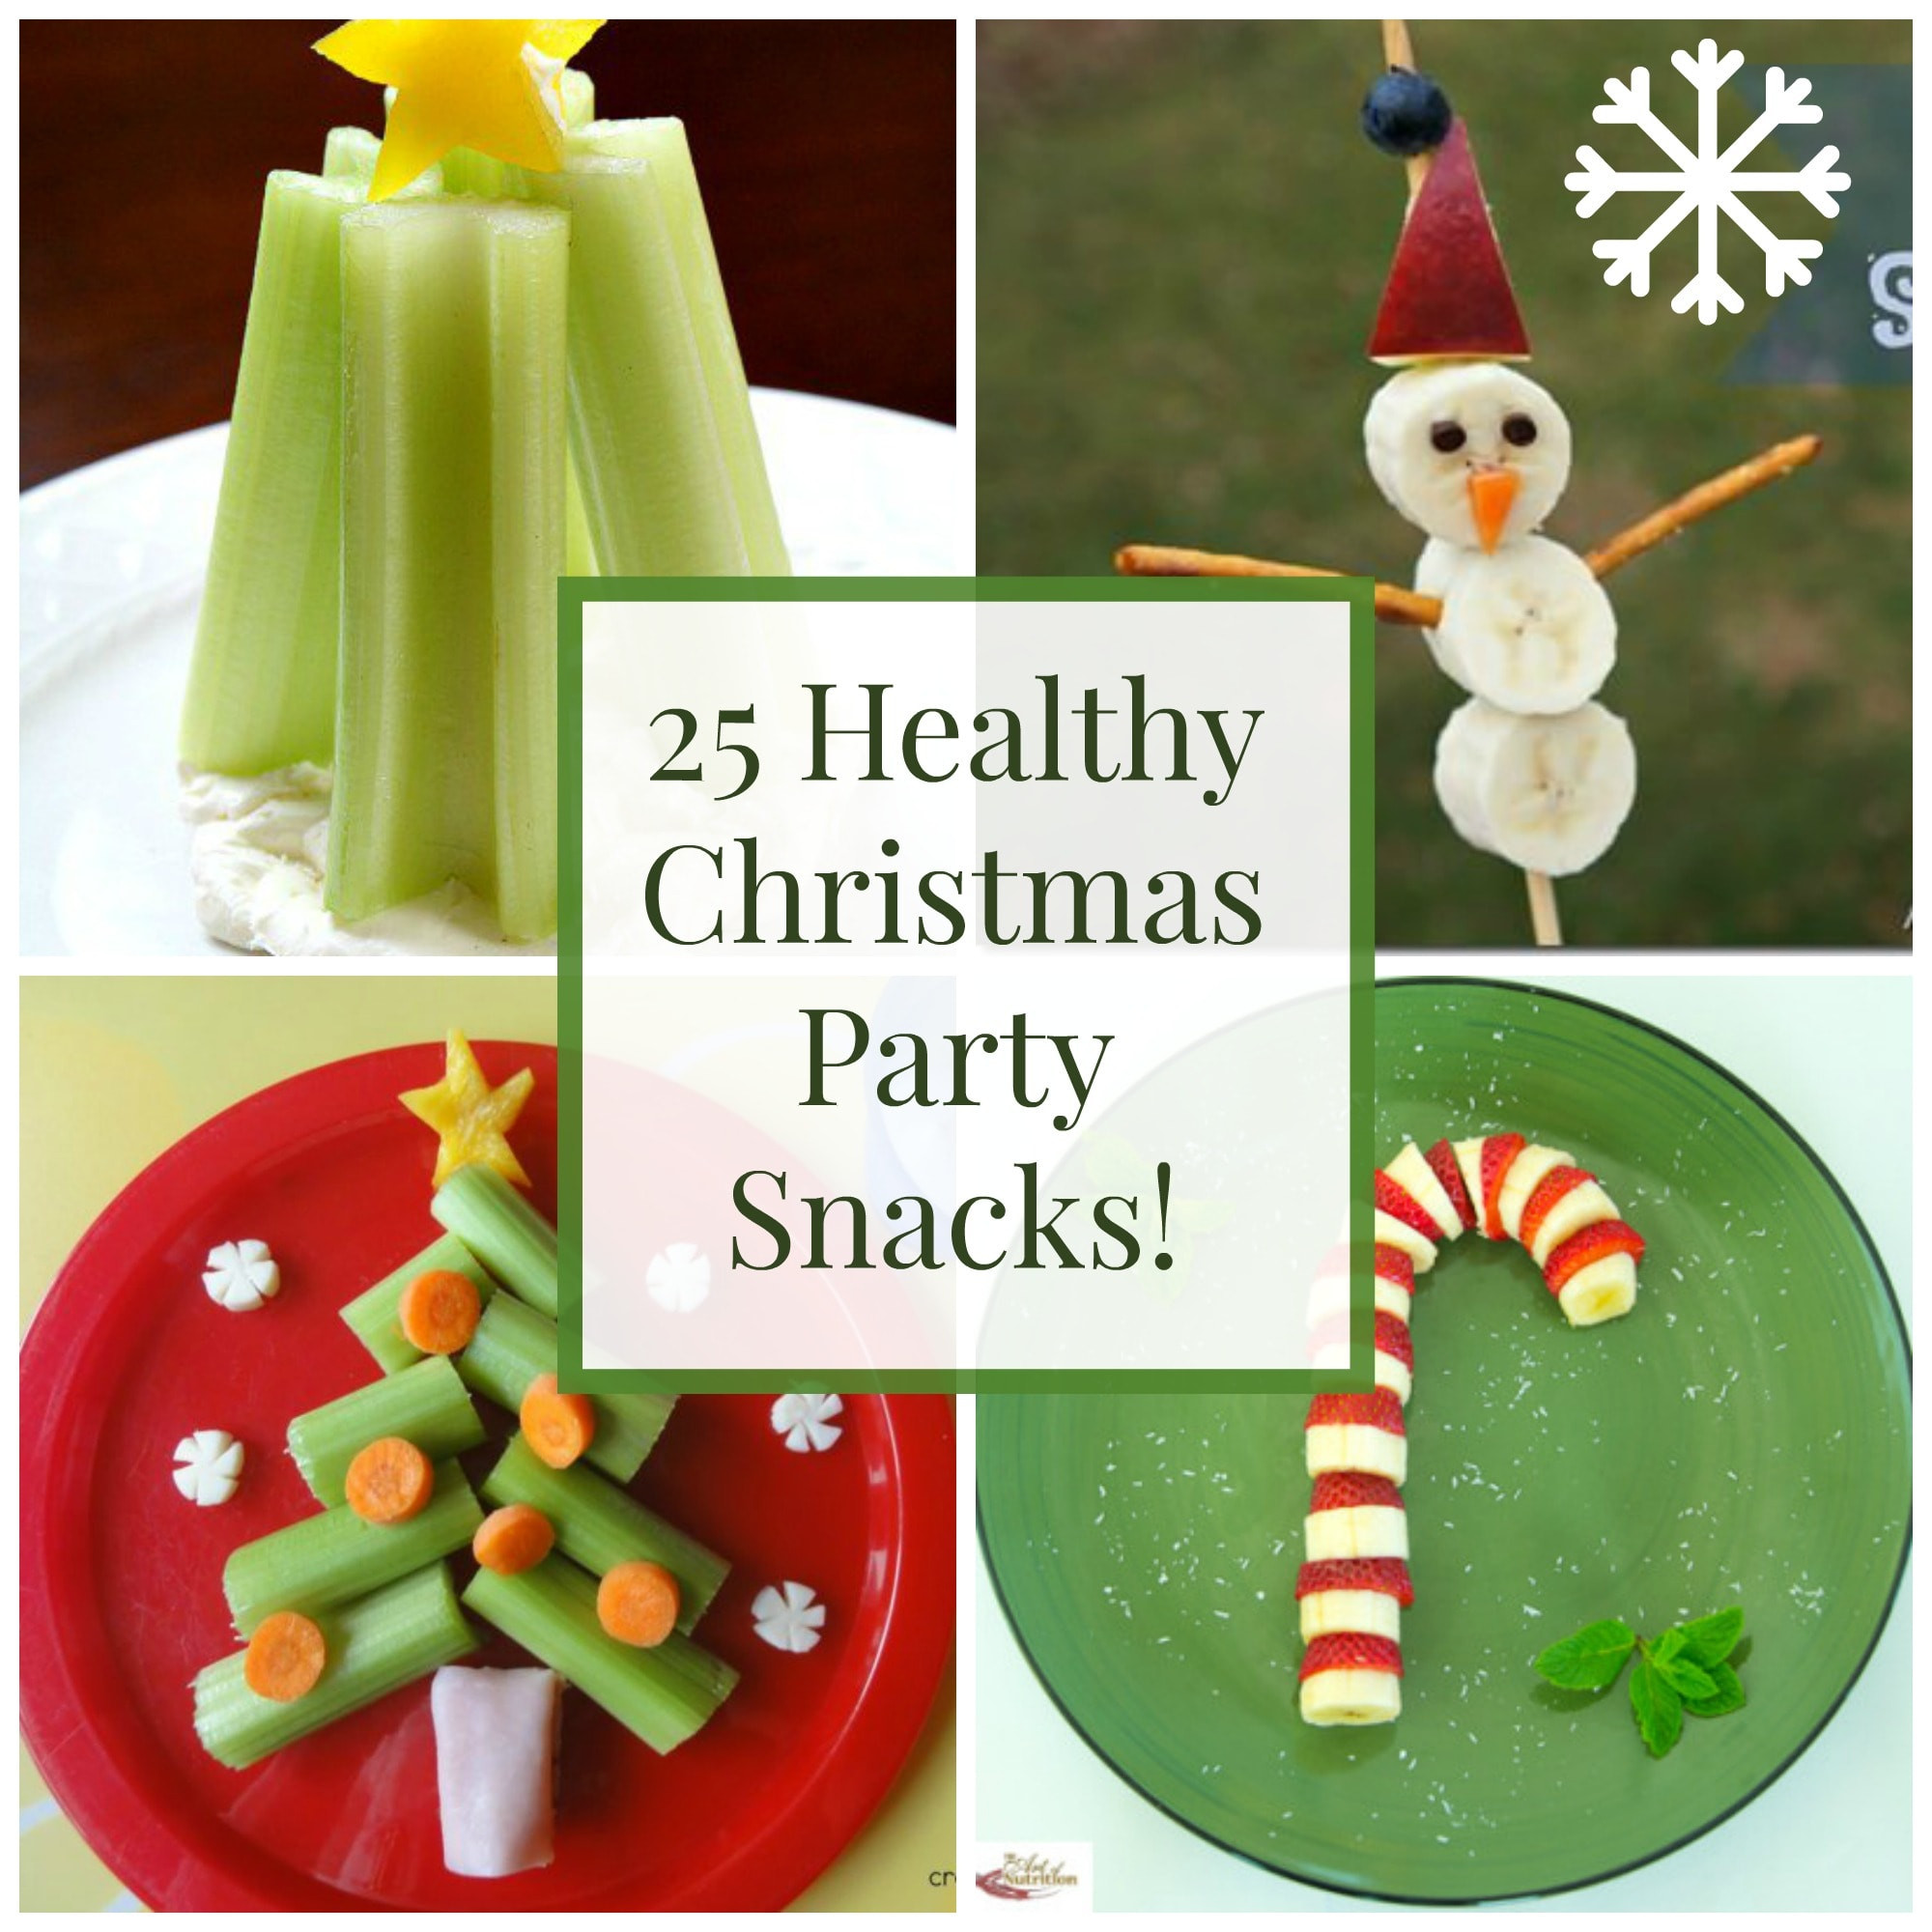 Holiday Party Food Ideas Kids
 25 Healthy Christmas Snacks and Party Foods